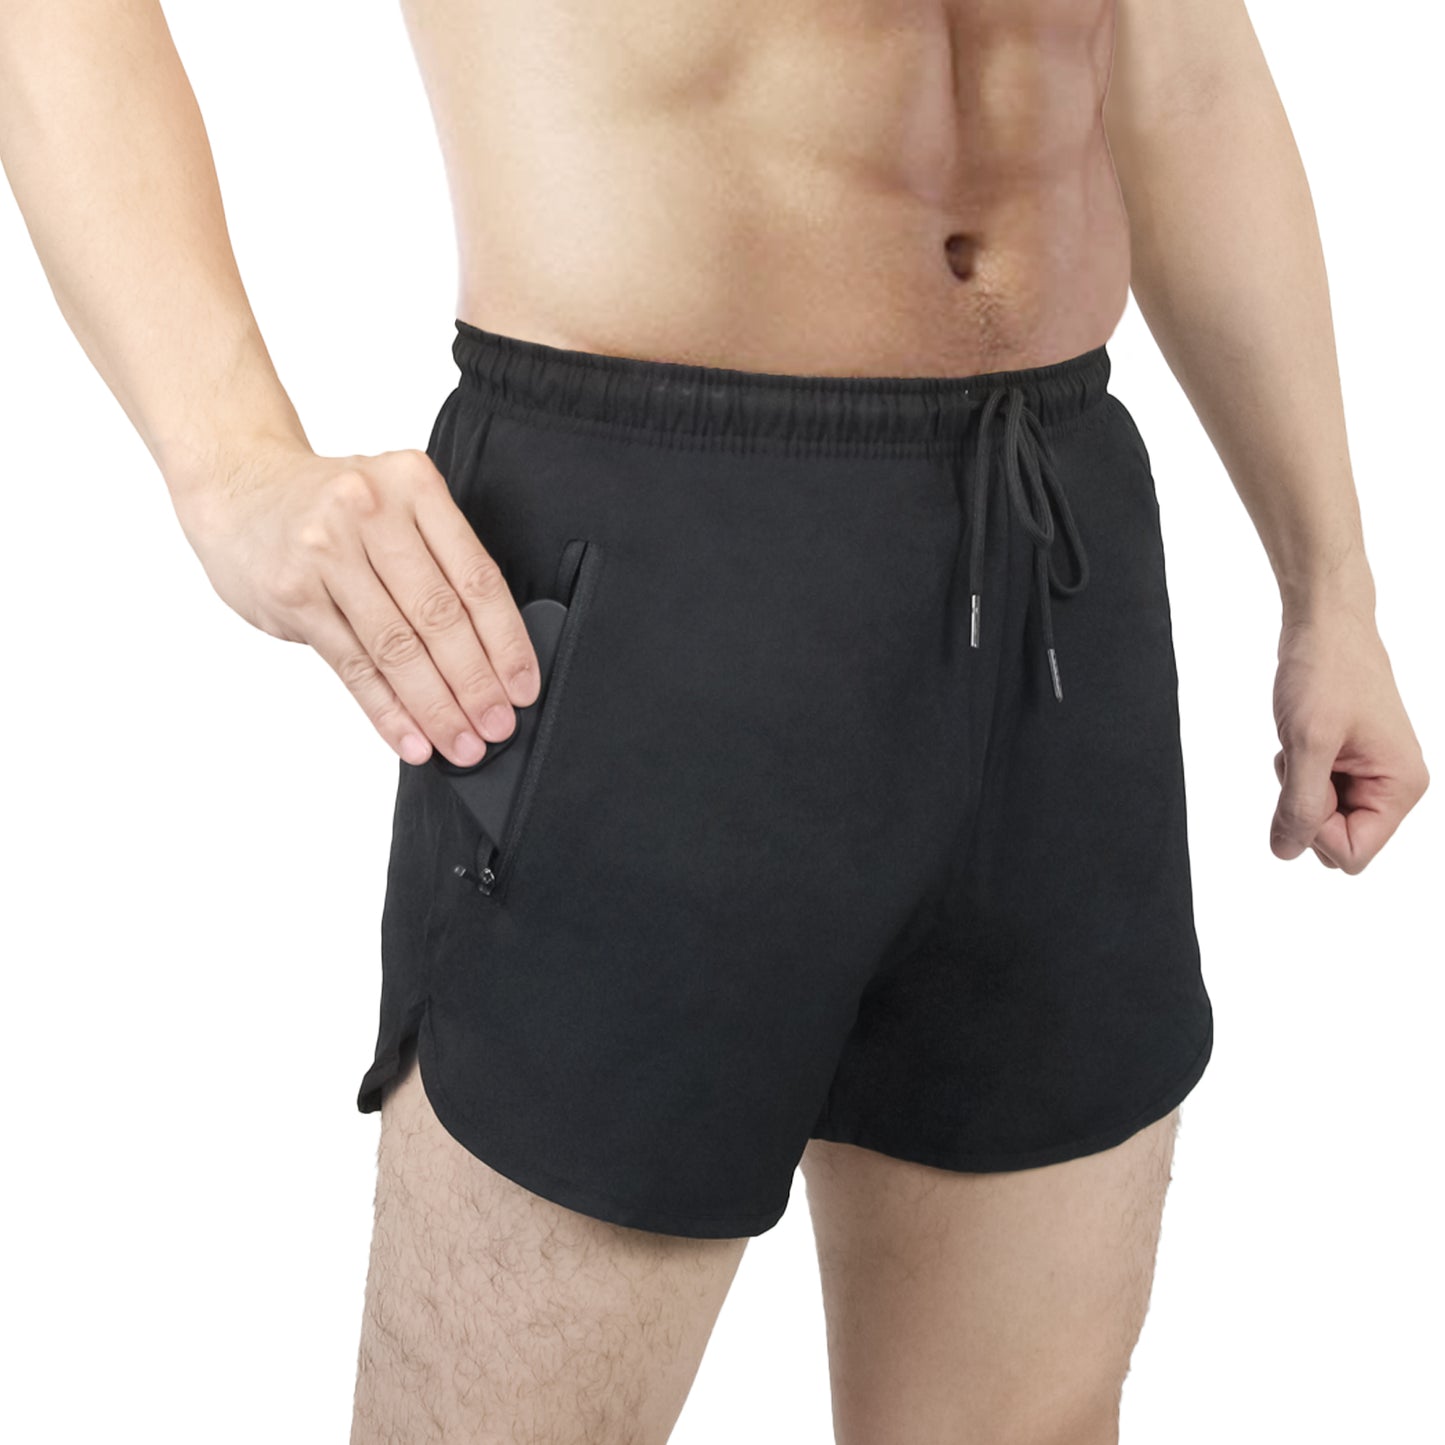 Men's Running Shorts Quick Dry Athletic Workout Comfortable Shorts